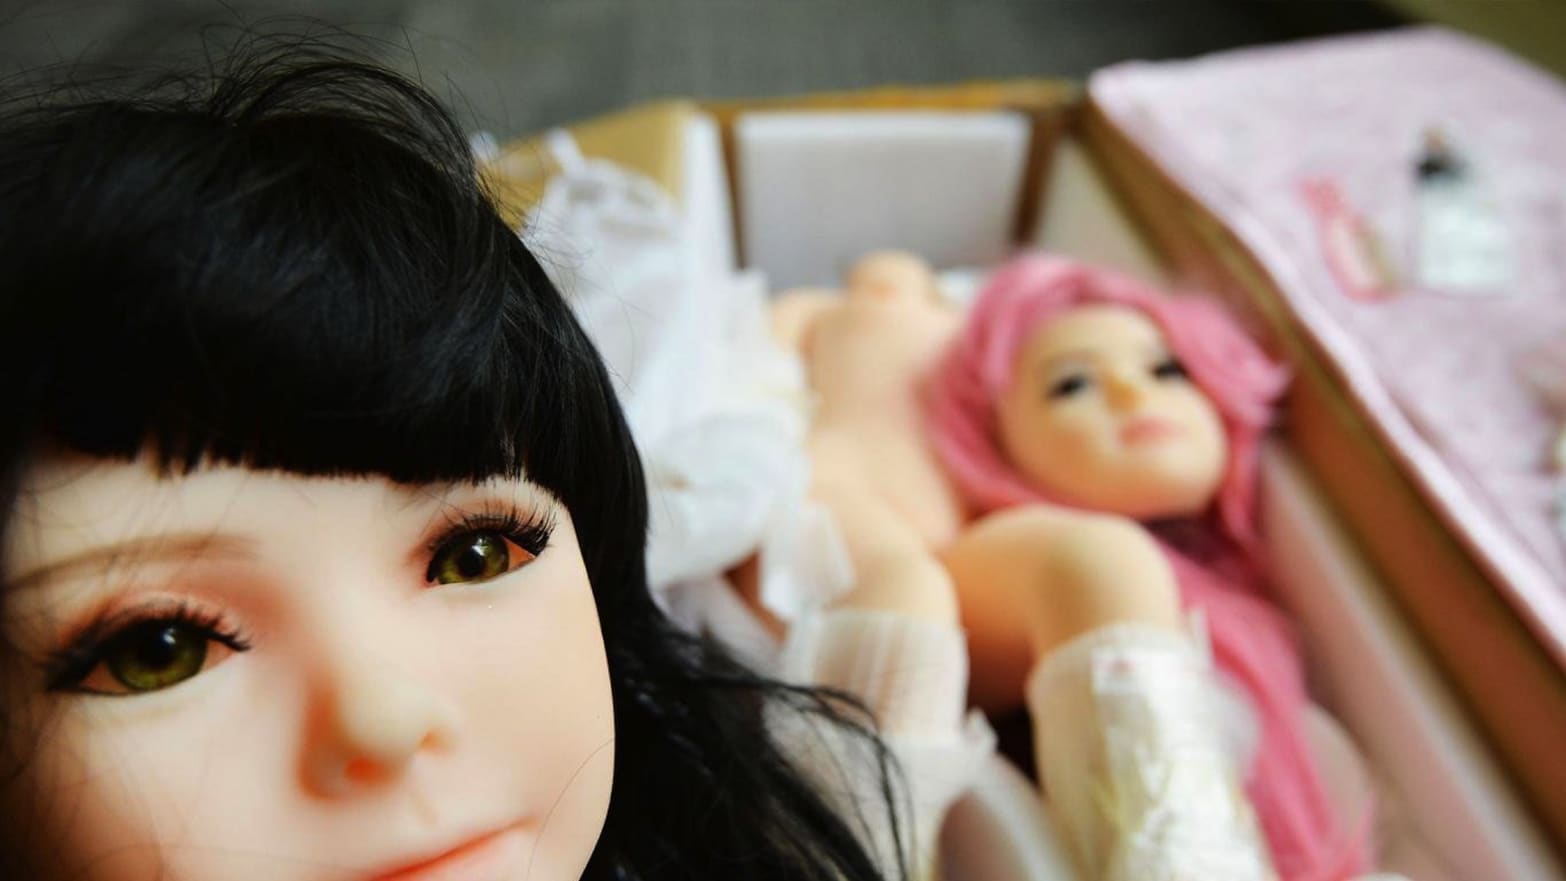 Child Sex Robots Are Coming to America. Can We Stop Them Before ...